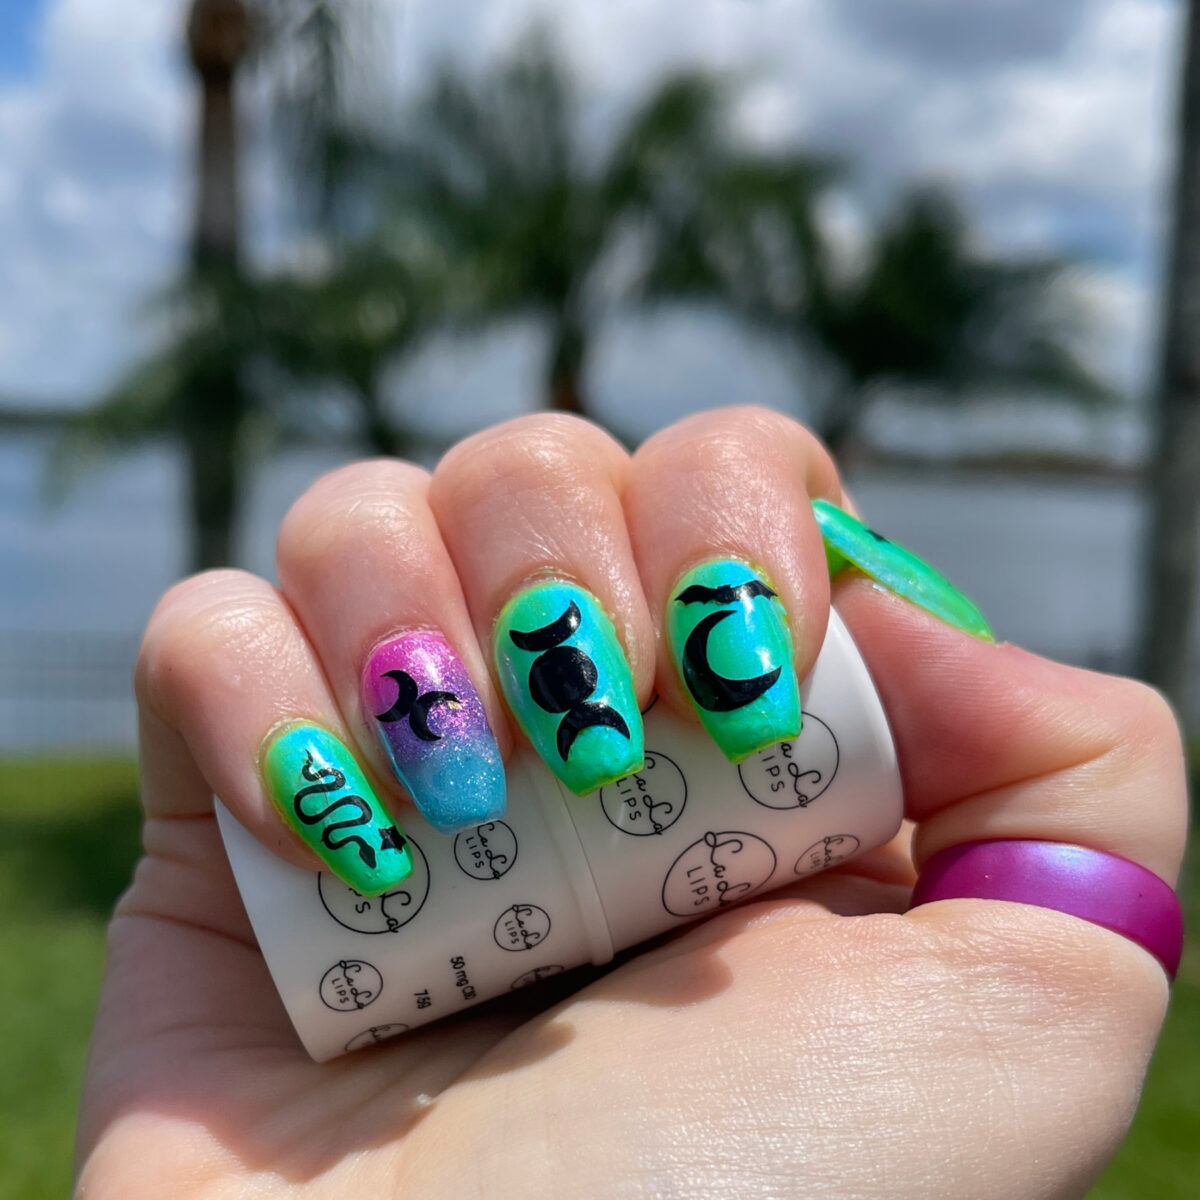 Bi Pride Nails in front of several palm trees in direct sun